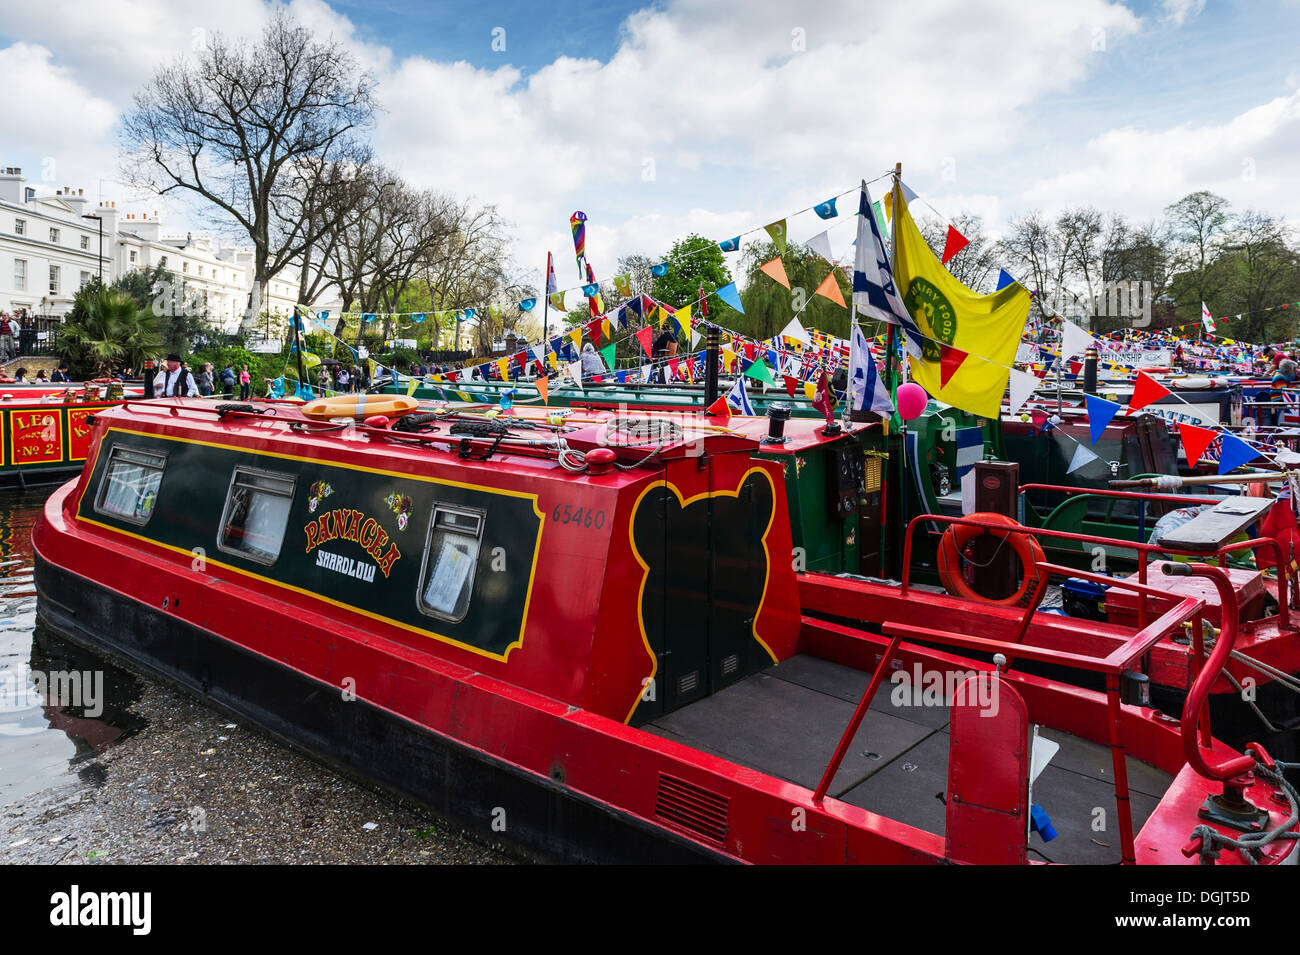 The Canalway Cavalcade at Little Venice in London. Stock Photo